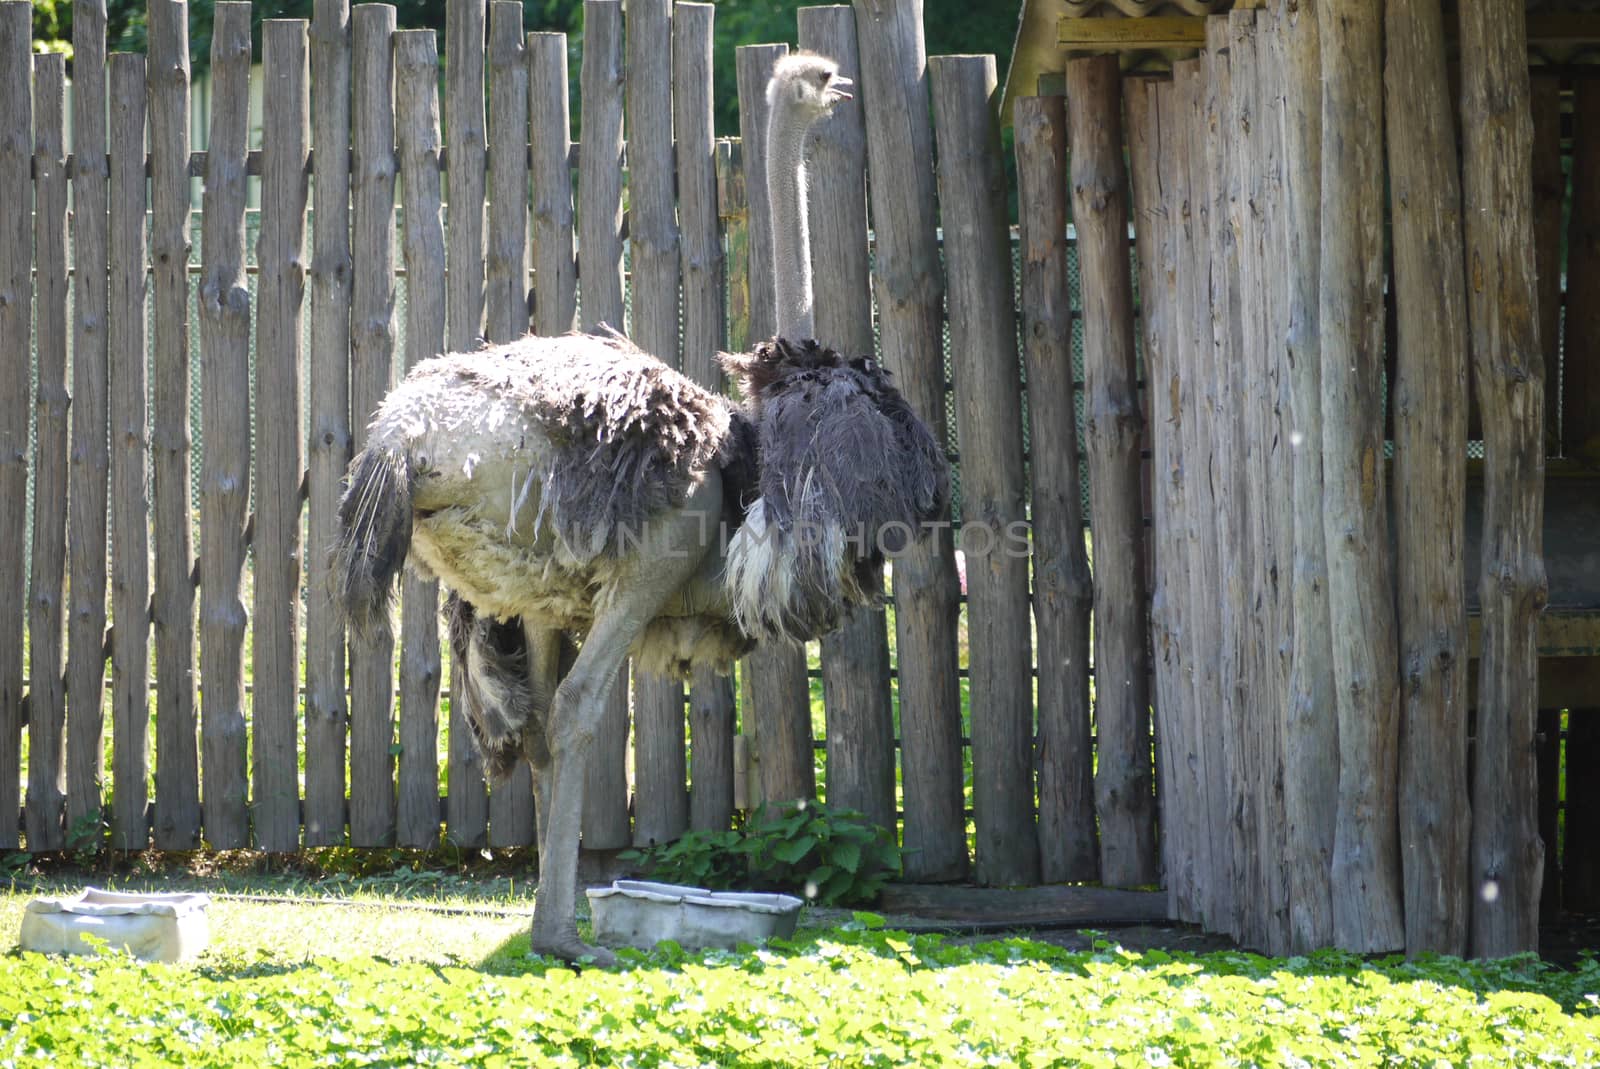 a large ostrich stands on the grass near the feeders in front of a wooden fence. zoo, nature reserve, place of family rest with children by Adamchuk